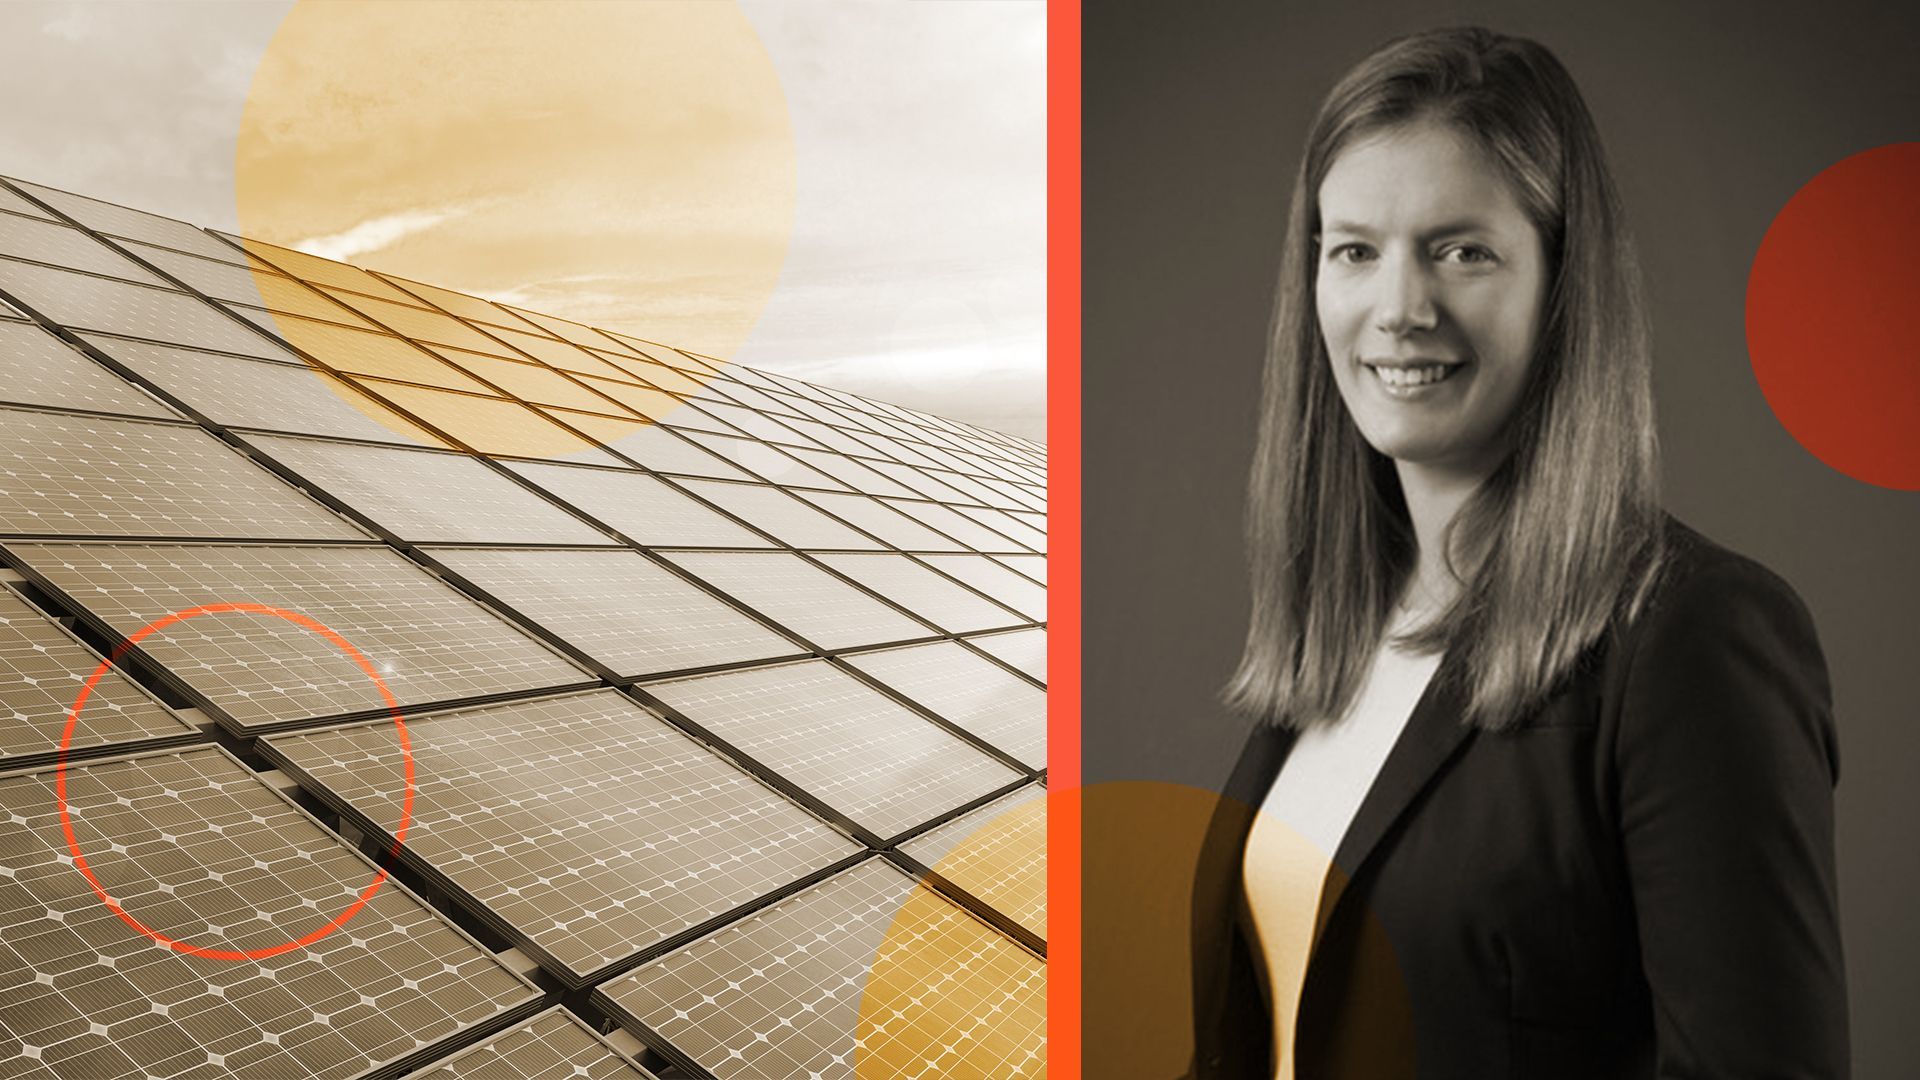 Photo illustration of partner and managing director Britta Von Oesen next to solar panels and circles.